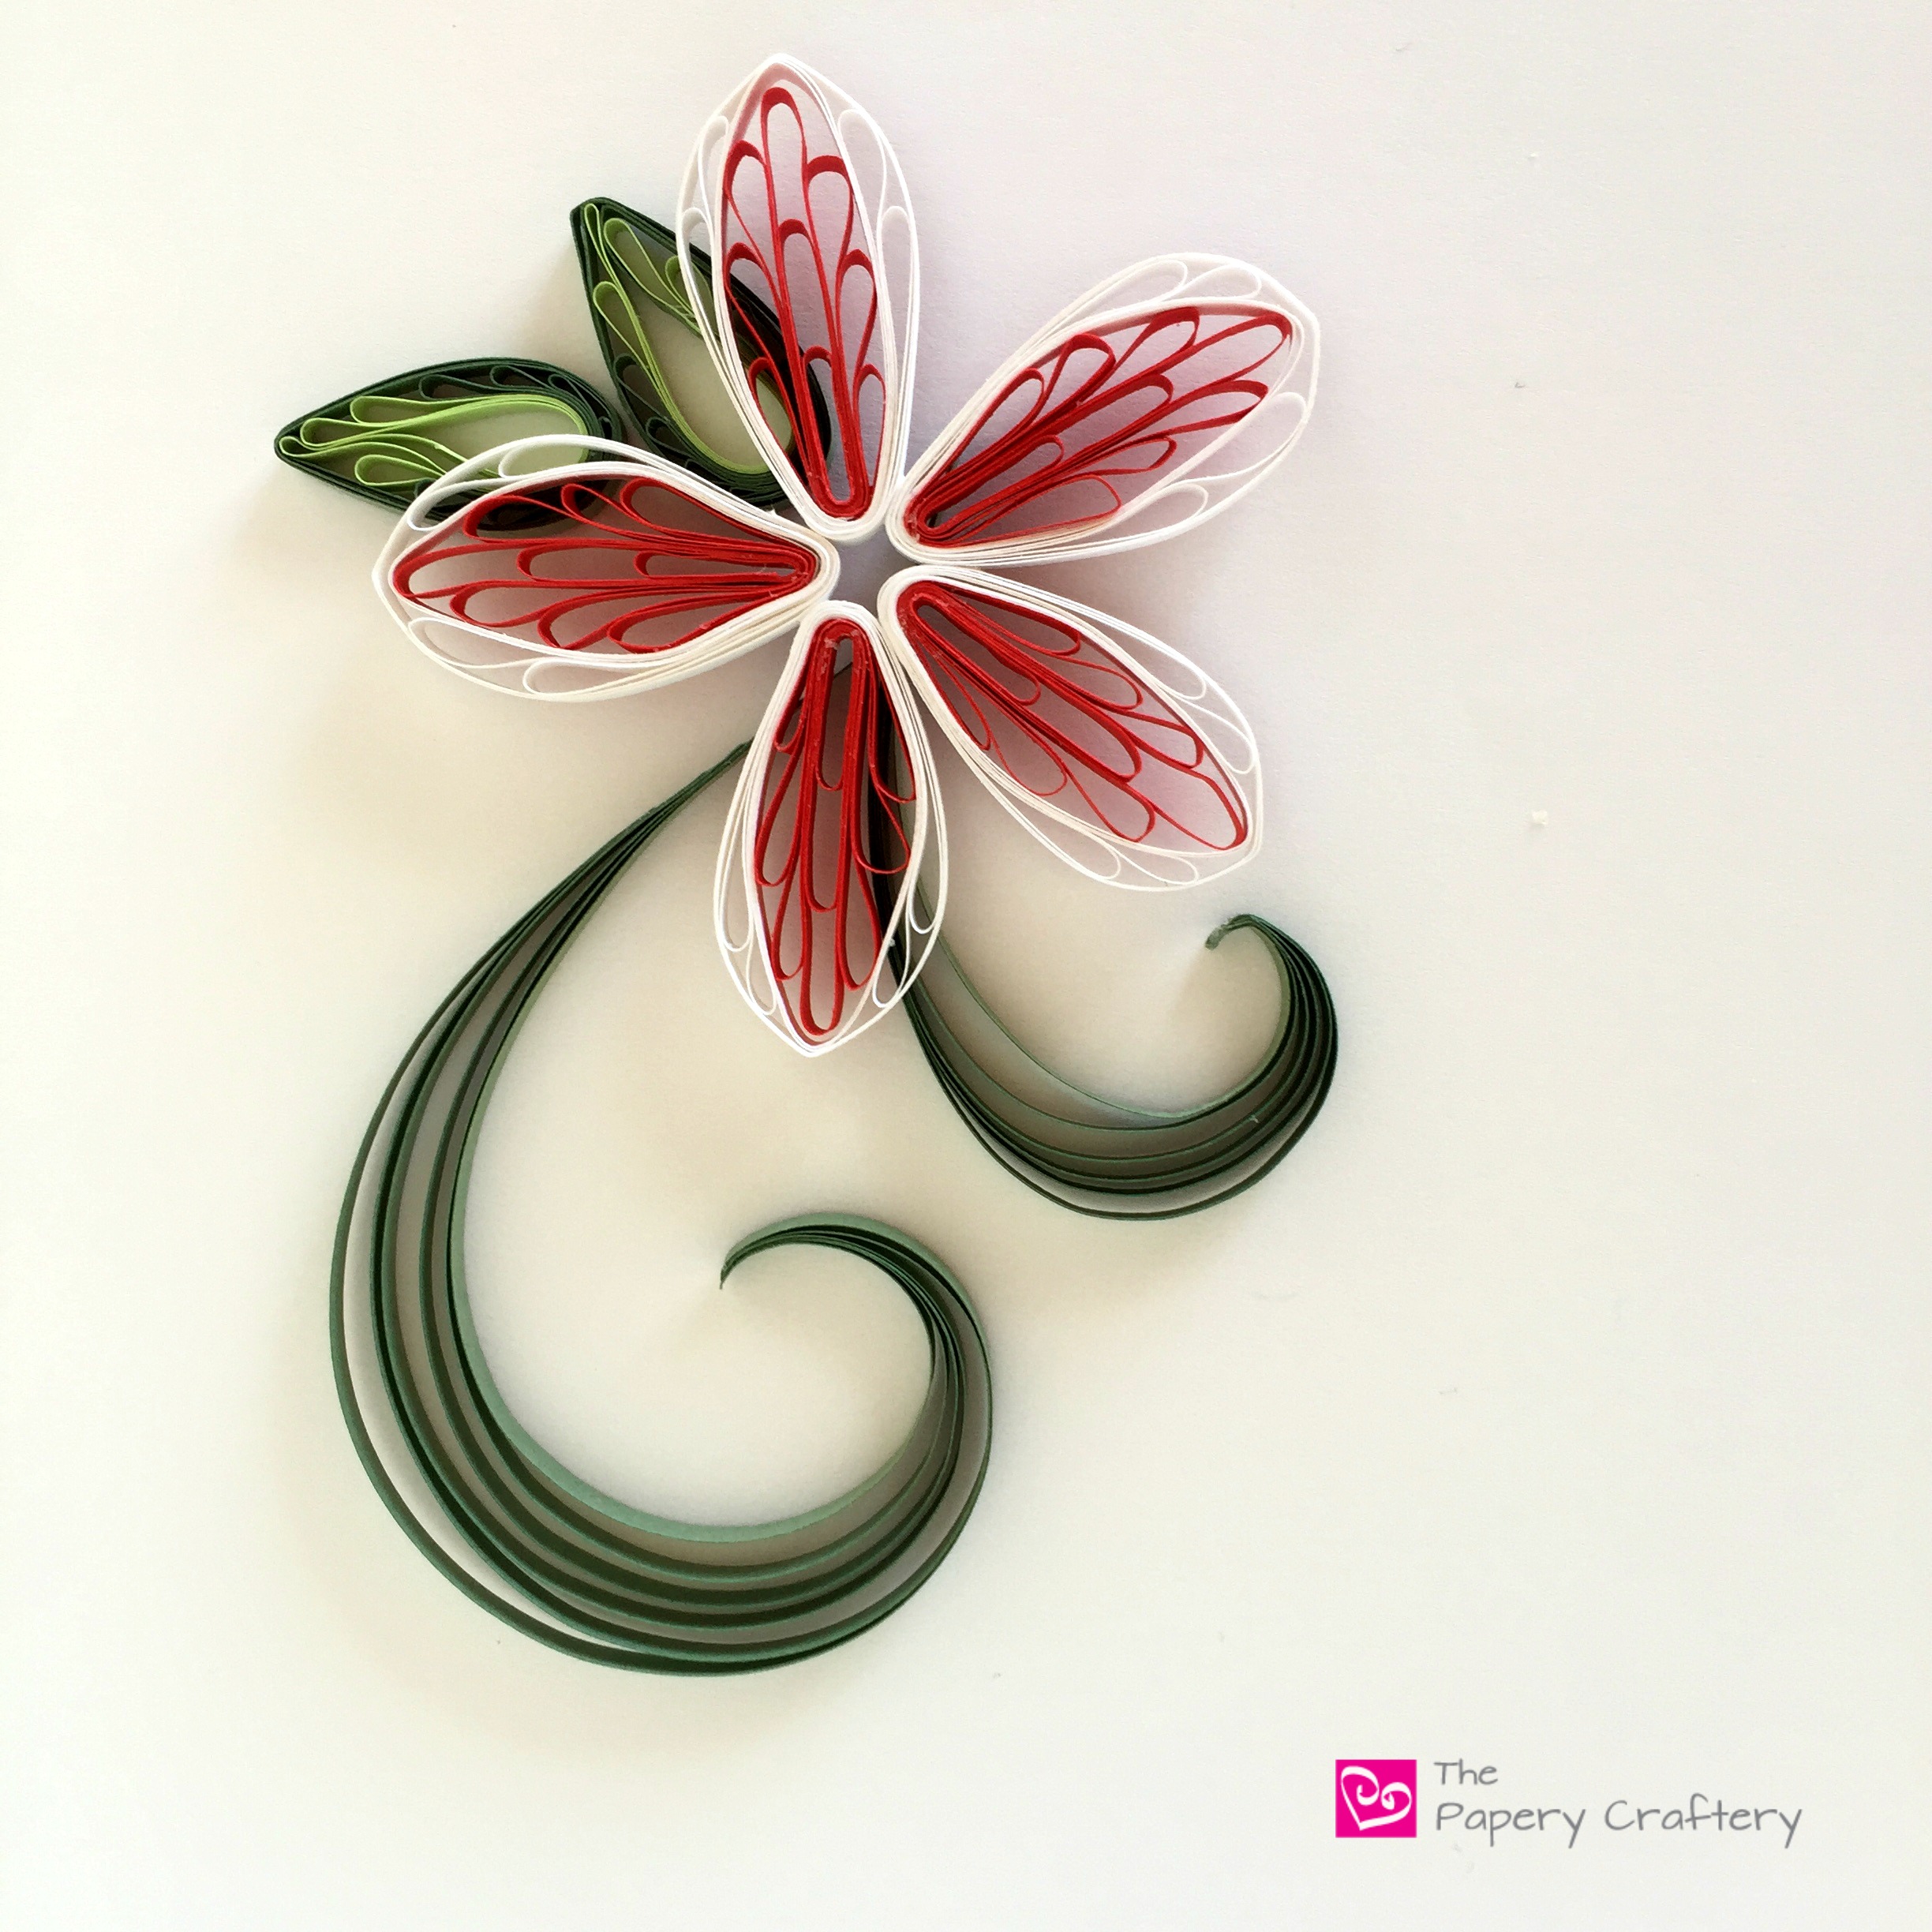 How to Make 3 Quilling Paper Flower Buds - The Papery Craftery